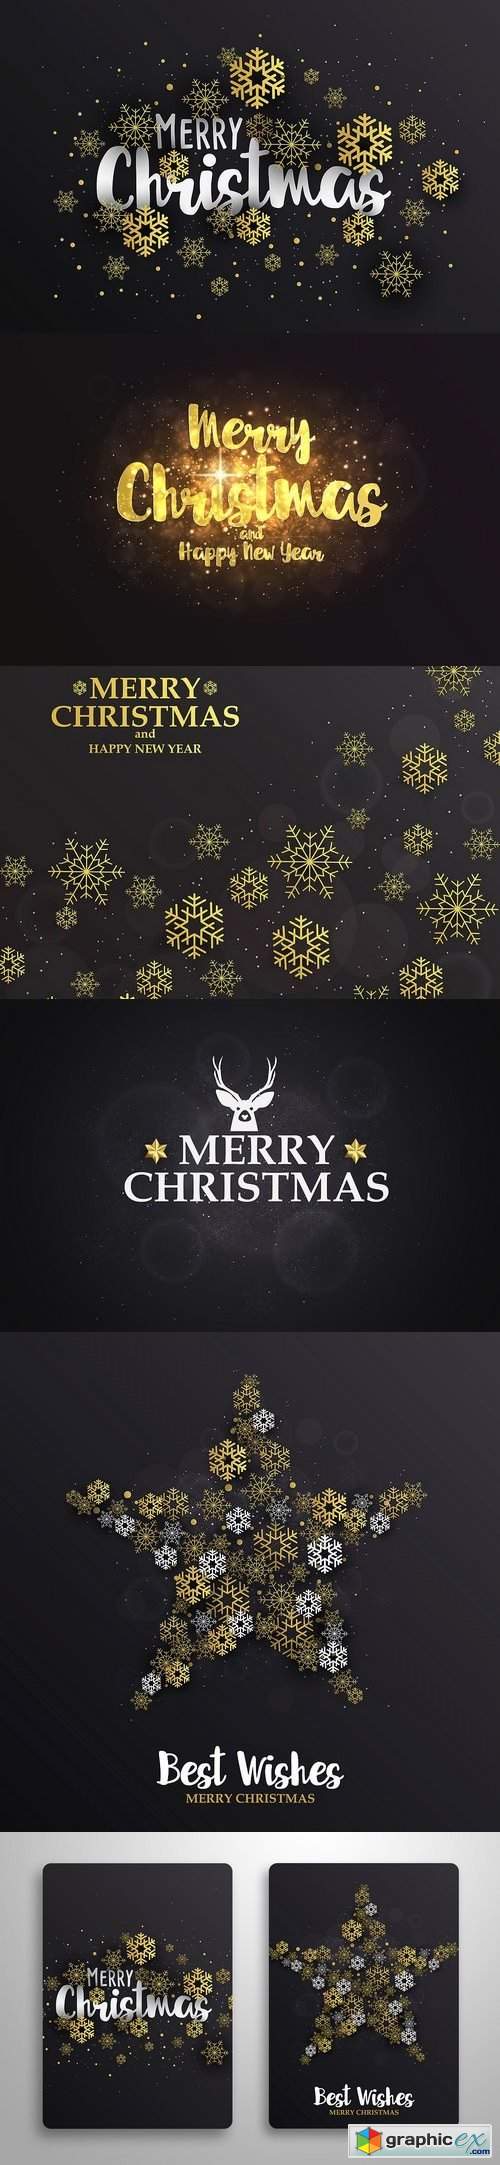 Set of Merry Christmas backgrounds 1067695